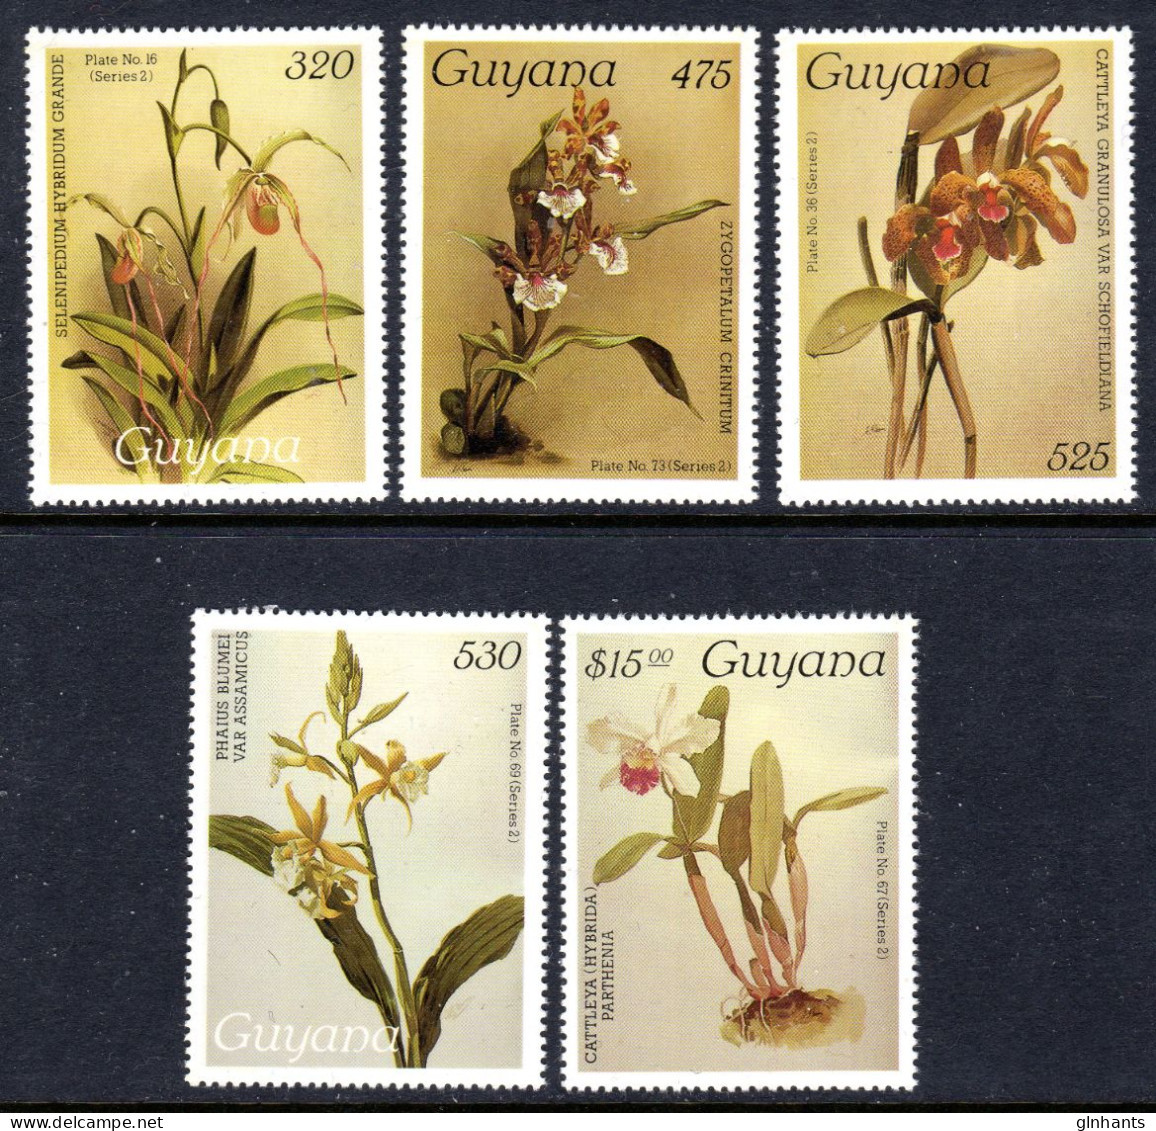 GUYANA - 1988 REICHENBACHIA ORCHIDS 29th ISSUE COMPLETE SET (5V) FIME MNH ** SG2314-2318 - Guiana (1966-...)